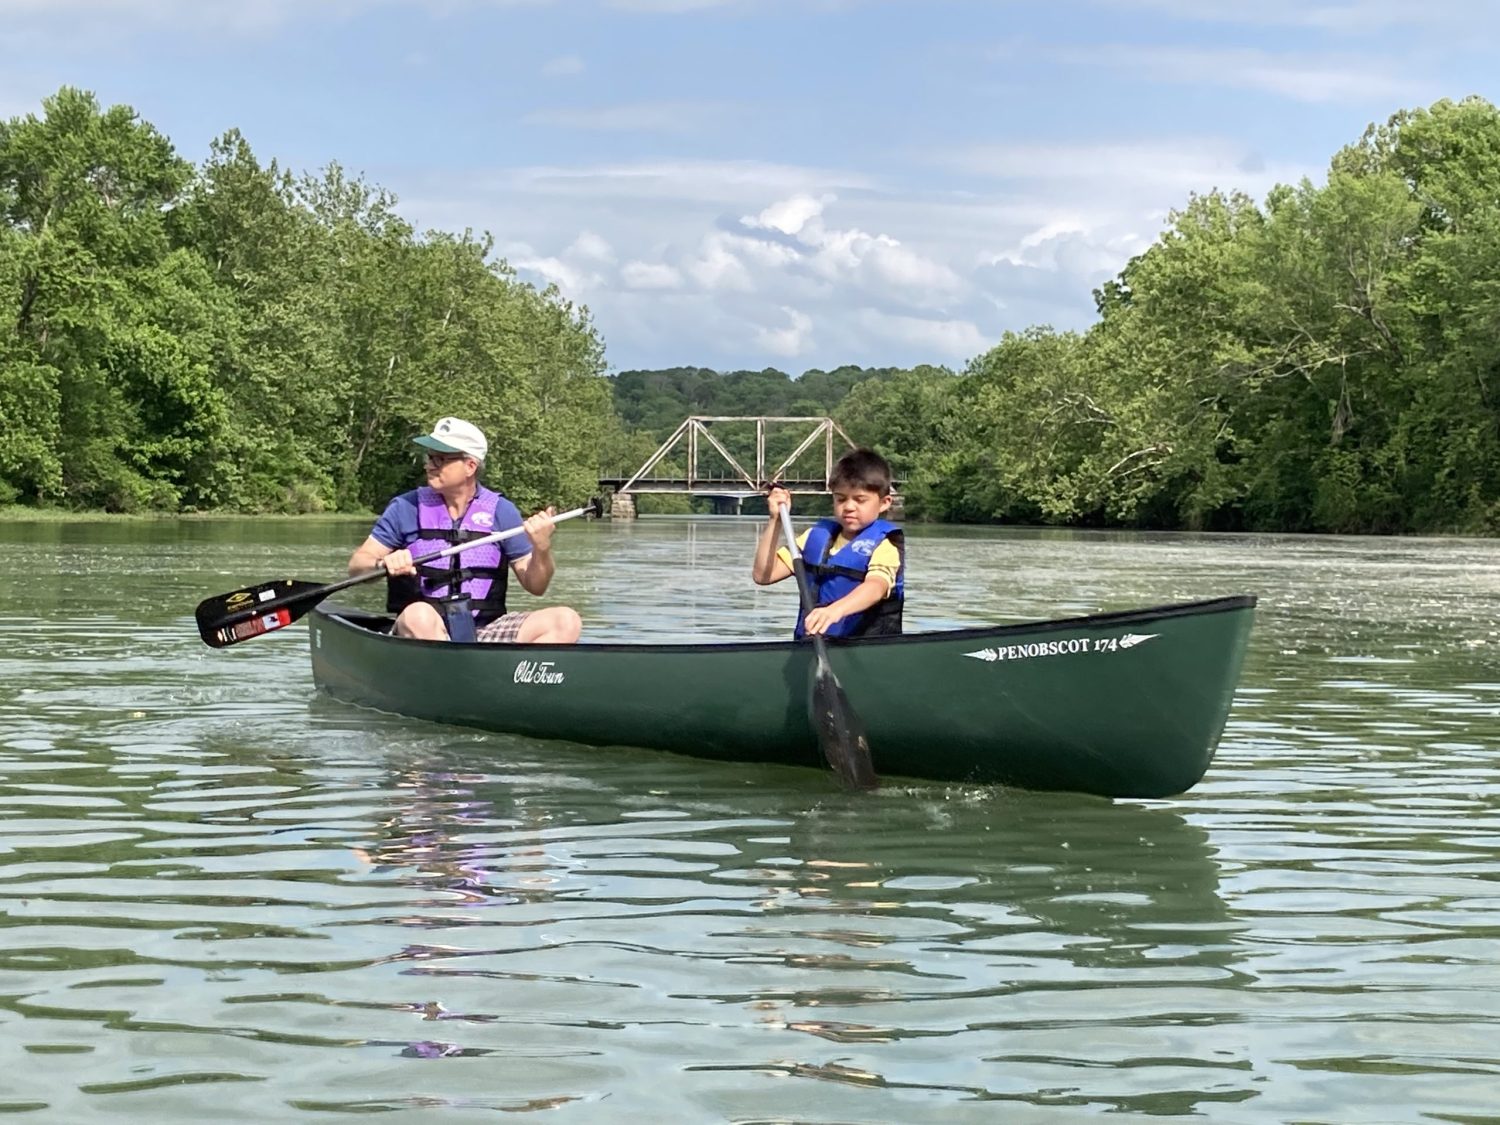 Springfield's unusual water trail gets paddlers close to nature